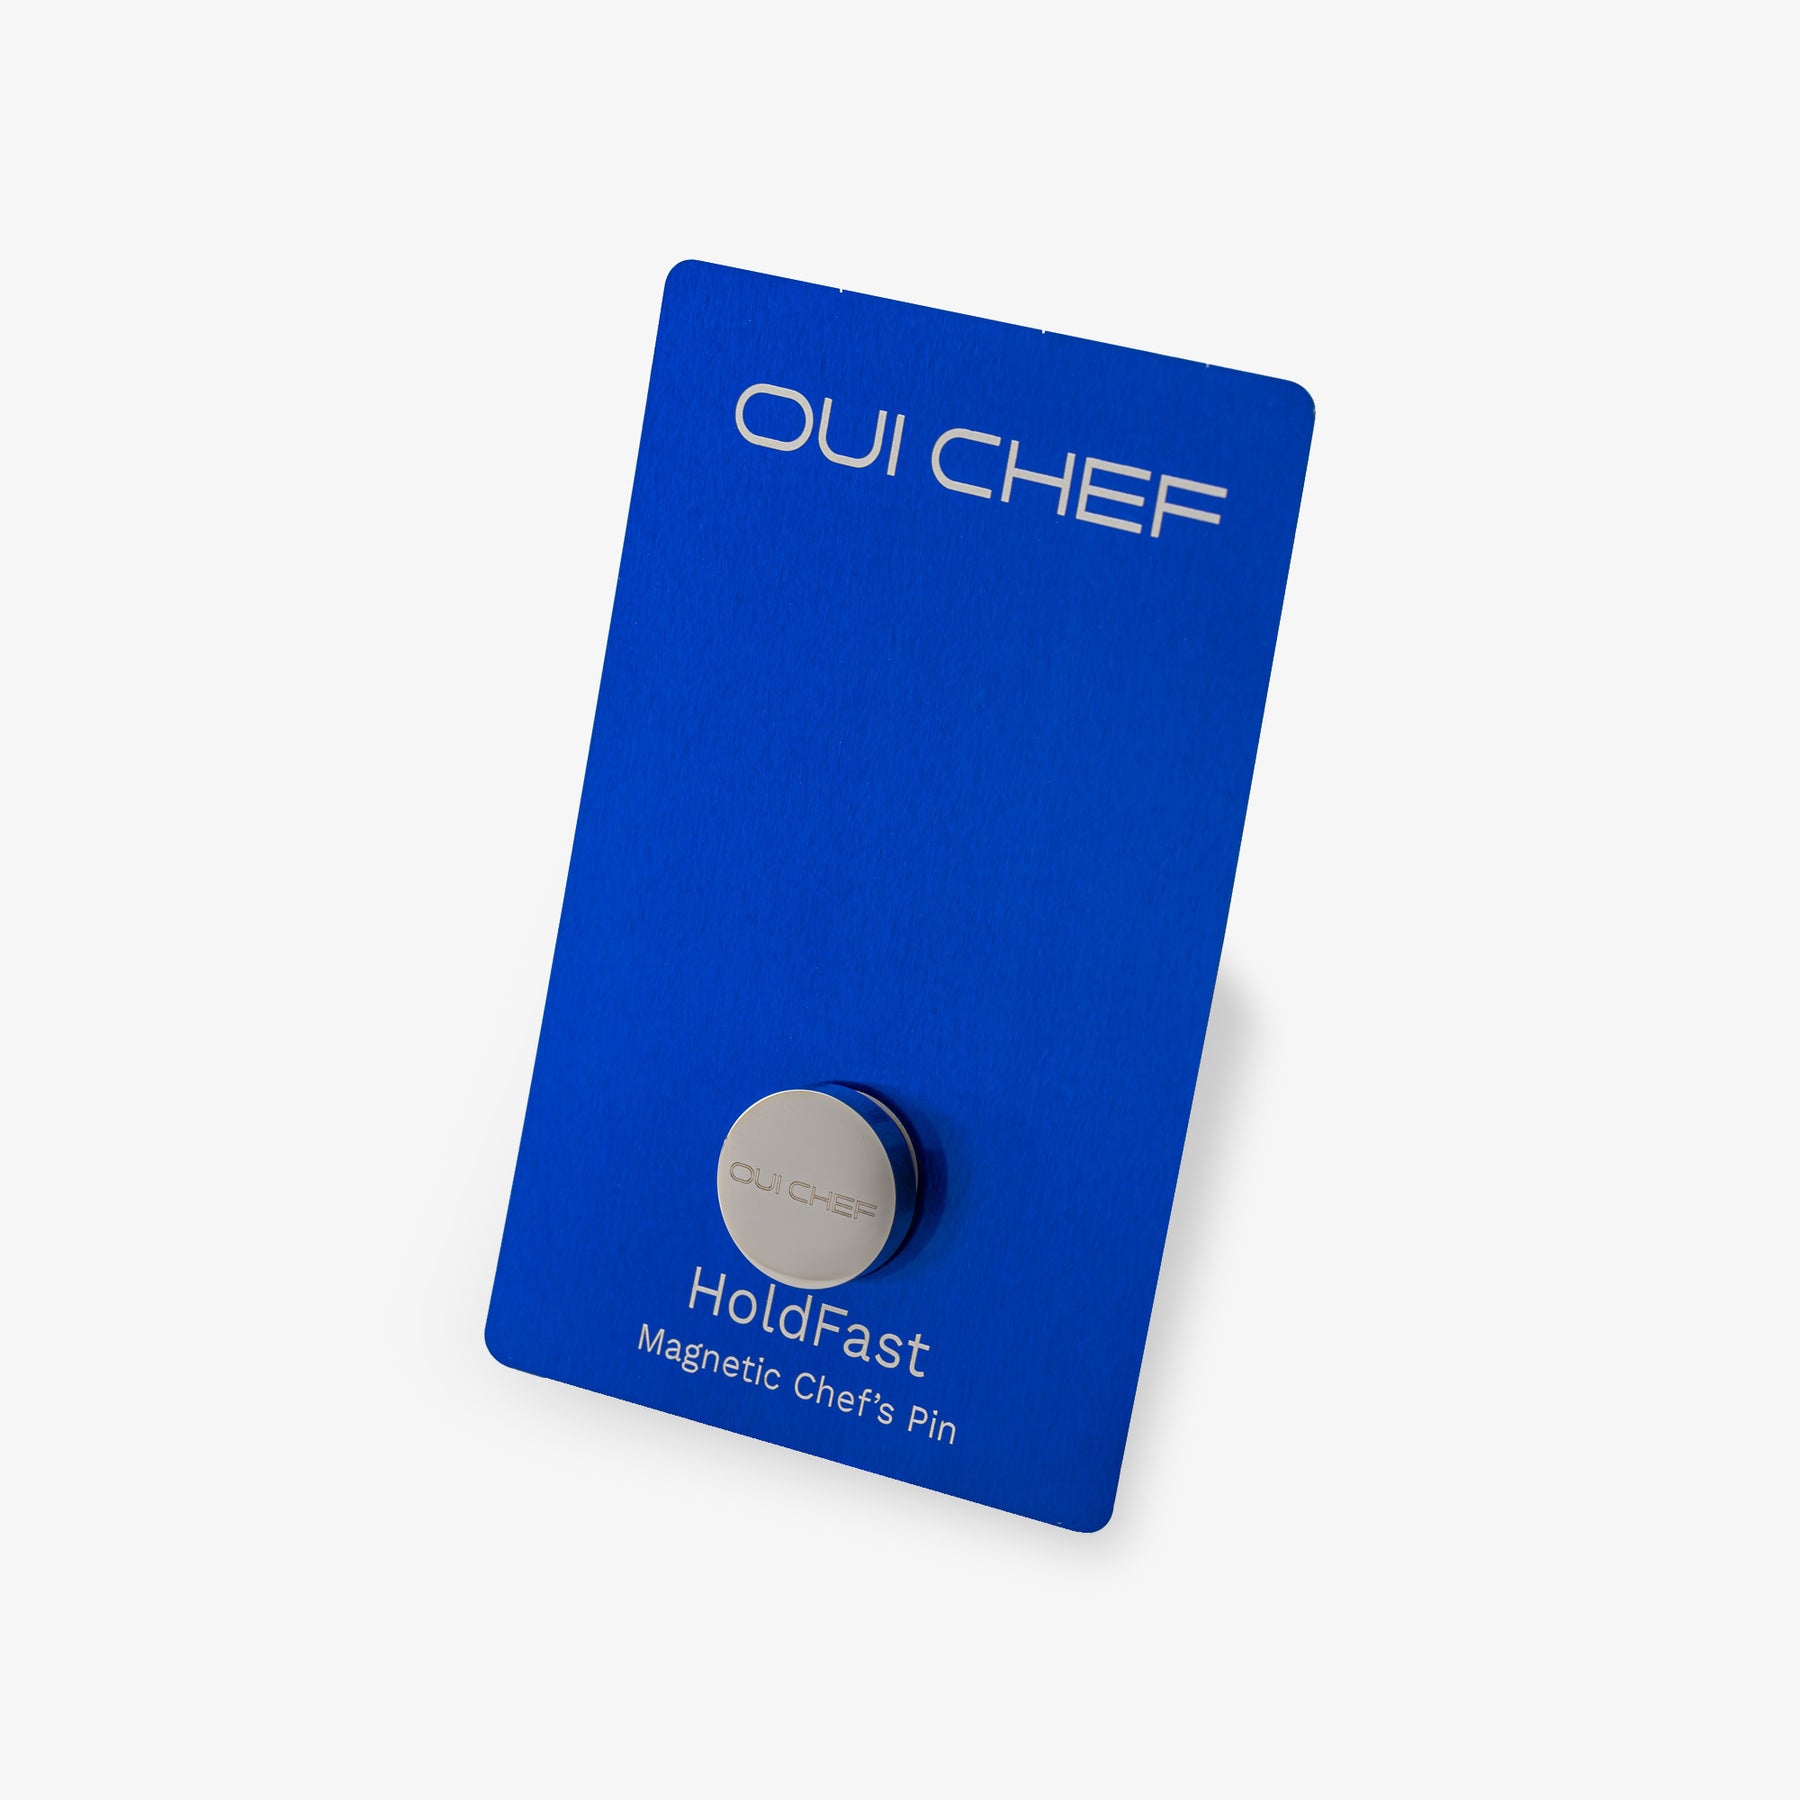 Oui_Chef_Magnetic_Chefs_Pin